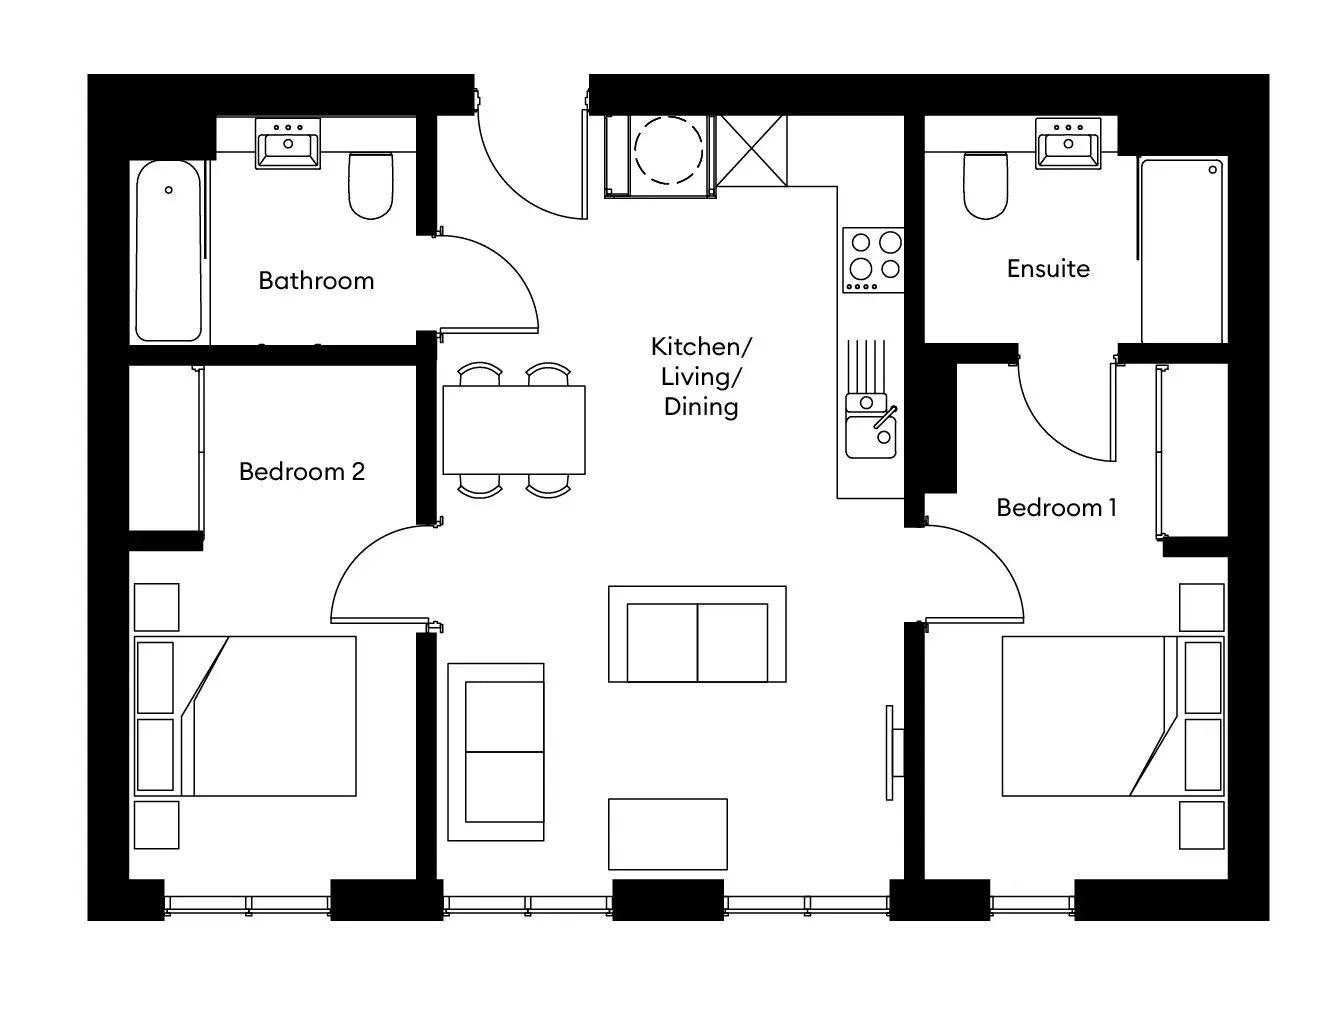 Floorplan of a two bed apartment